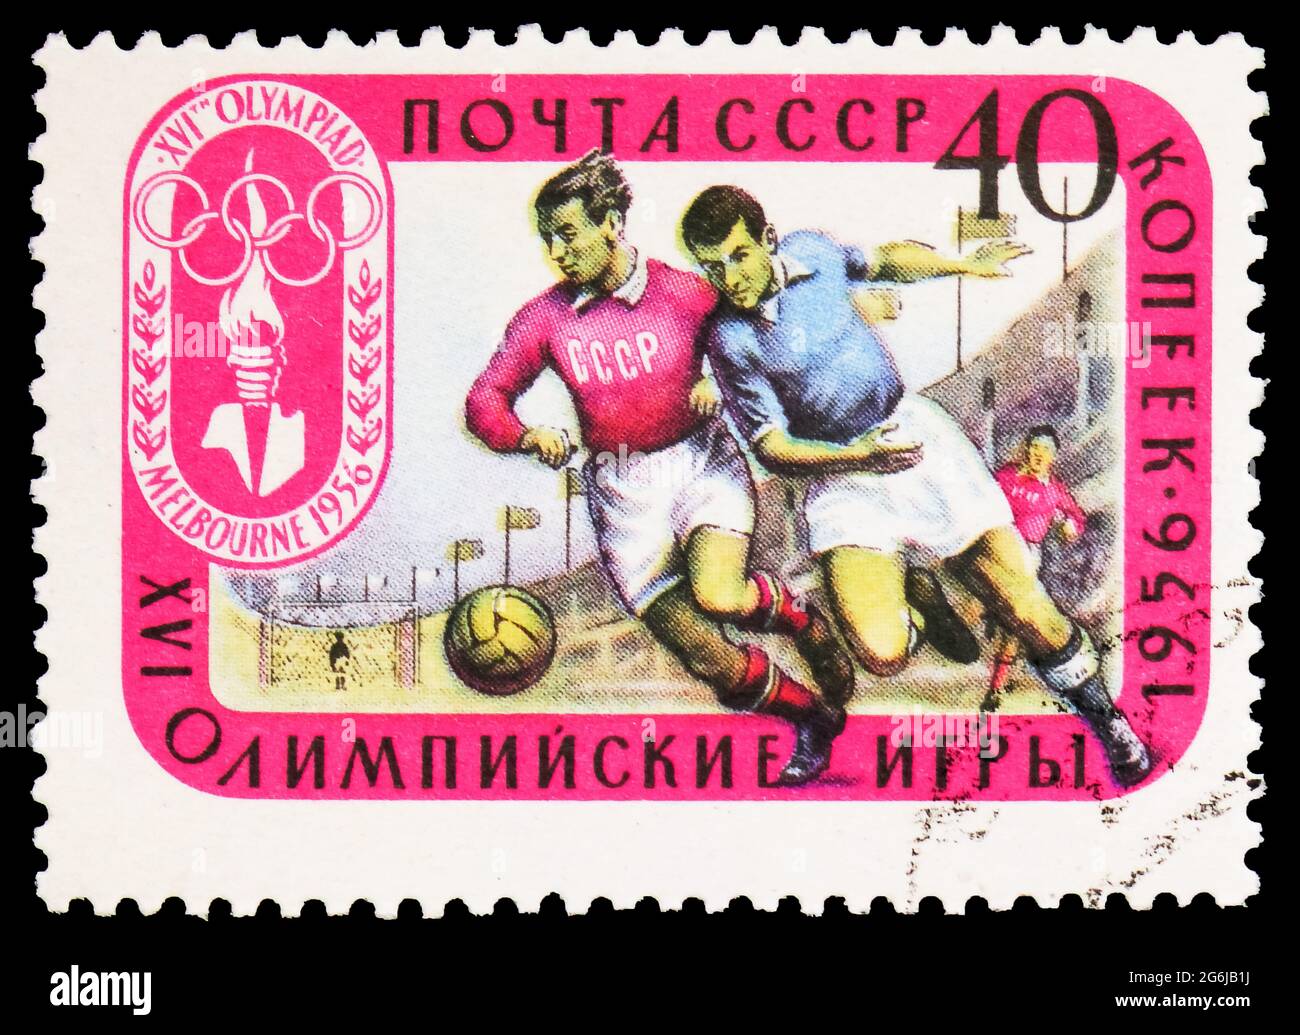 MOSCOW, RUSSIA - MARCH 21, 2020: Postage stamp printed in Soviet Union shows Soccer players, Olympic Games 1956 - Melbourne serie, circa 1957 Stock Photo